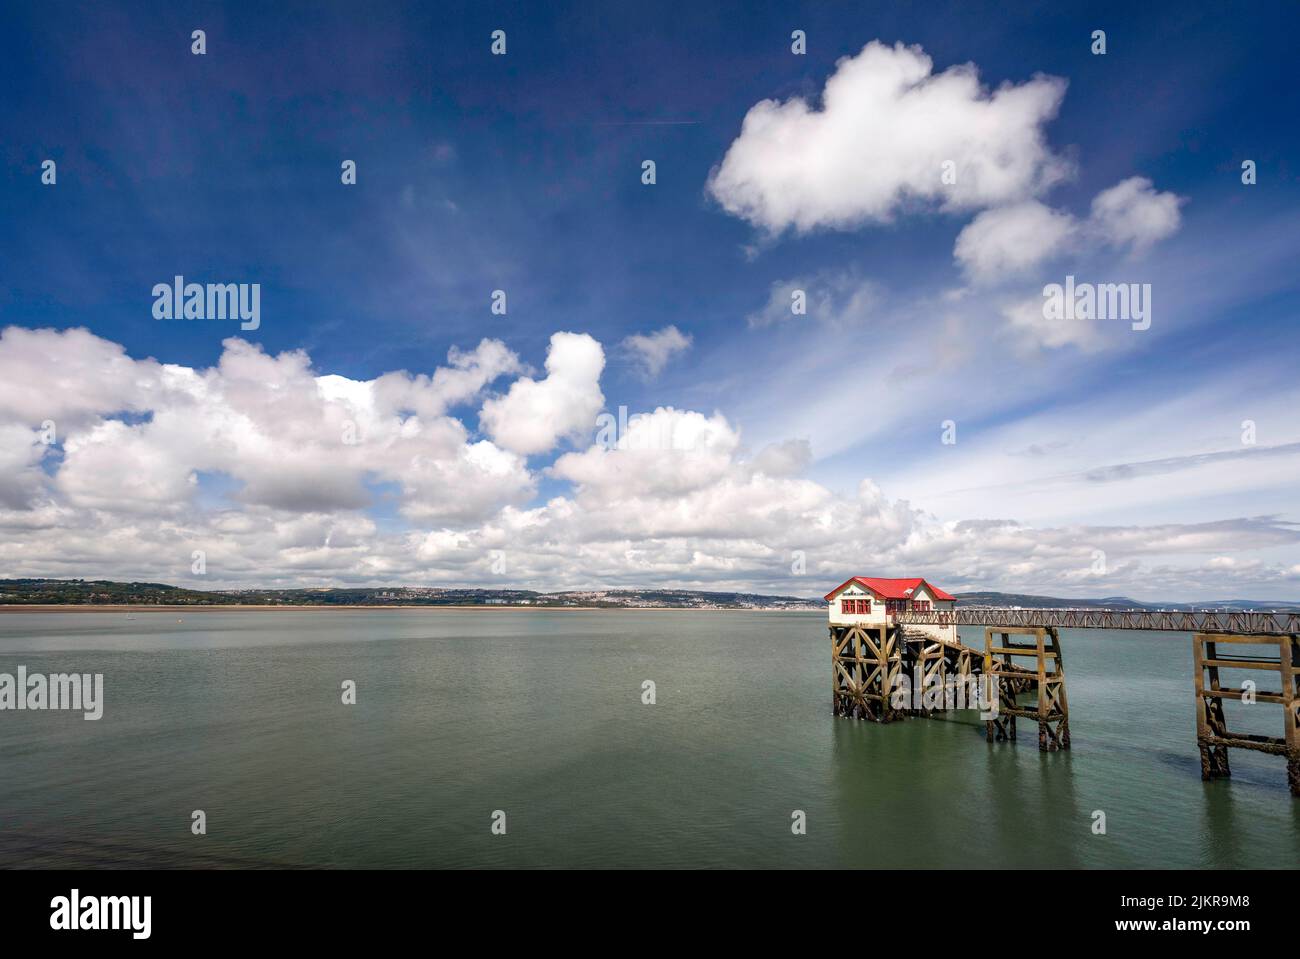 The now redundant old Mumbles lifeboat station on Mumbles Pier in Swansea, South Wales UK Stock Photo